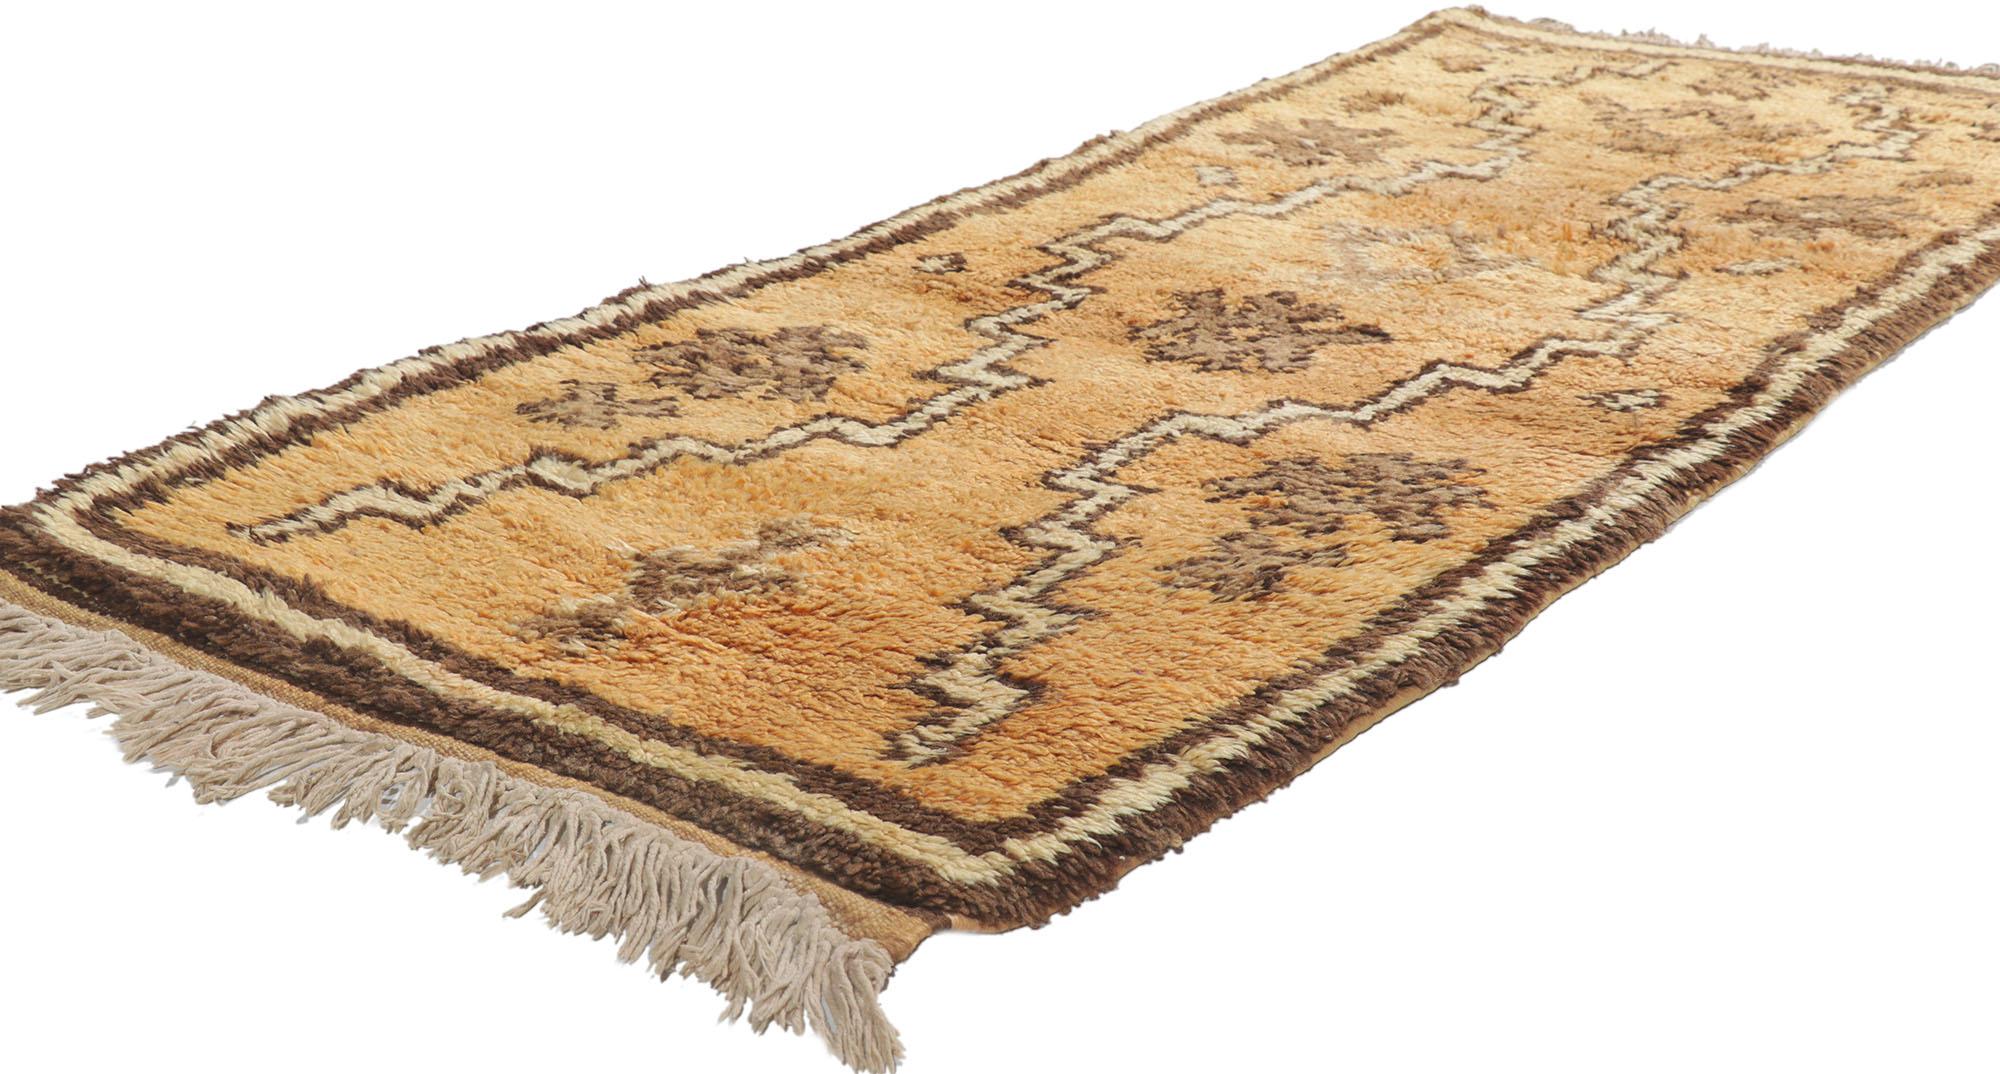 21627 Vintage Berber Moroccan Rug, 02'05 x 06'02.
Cheerful and beguiling with ambiguous Berber symbols, this hand-knotted wool vintage Moroccan rug is a beautiful cultural artifact of the 1970s beautifully highlighting tribal elements and bold form